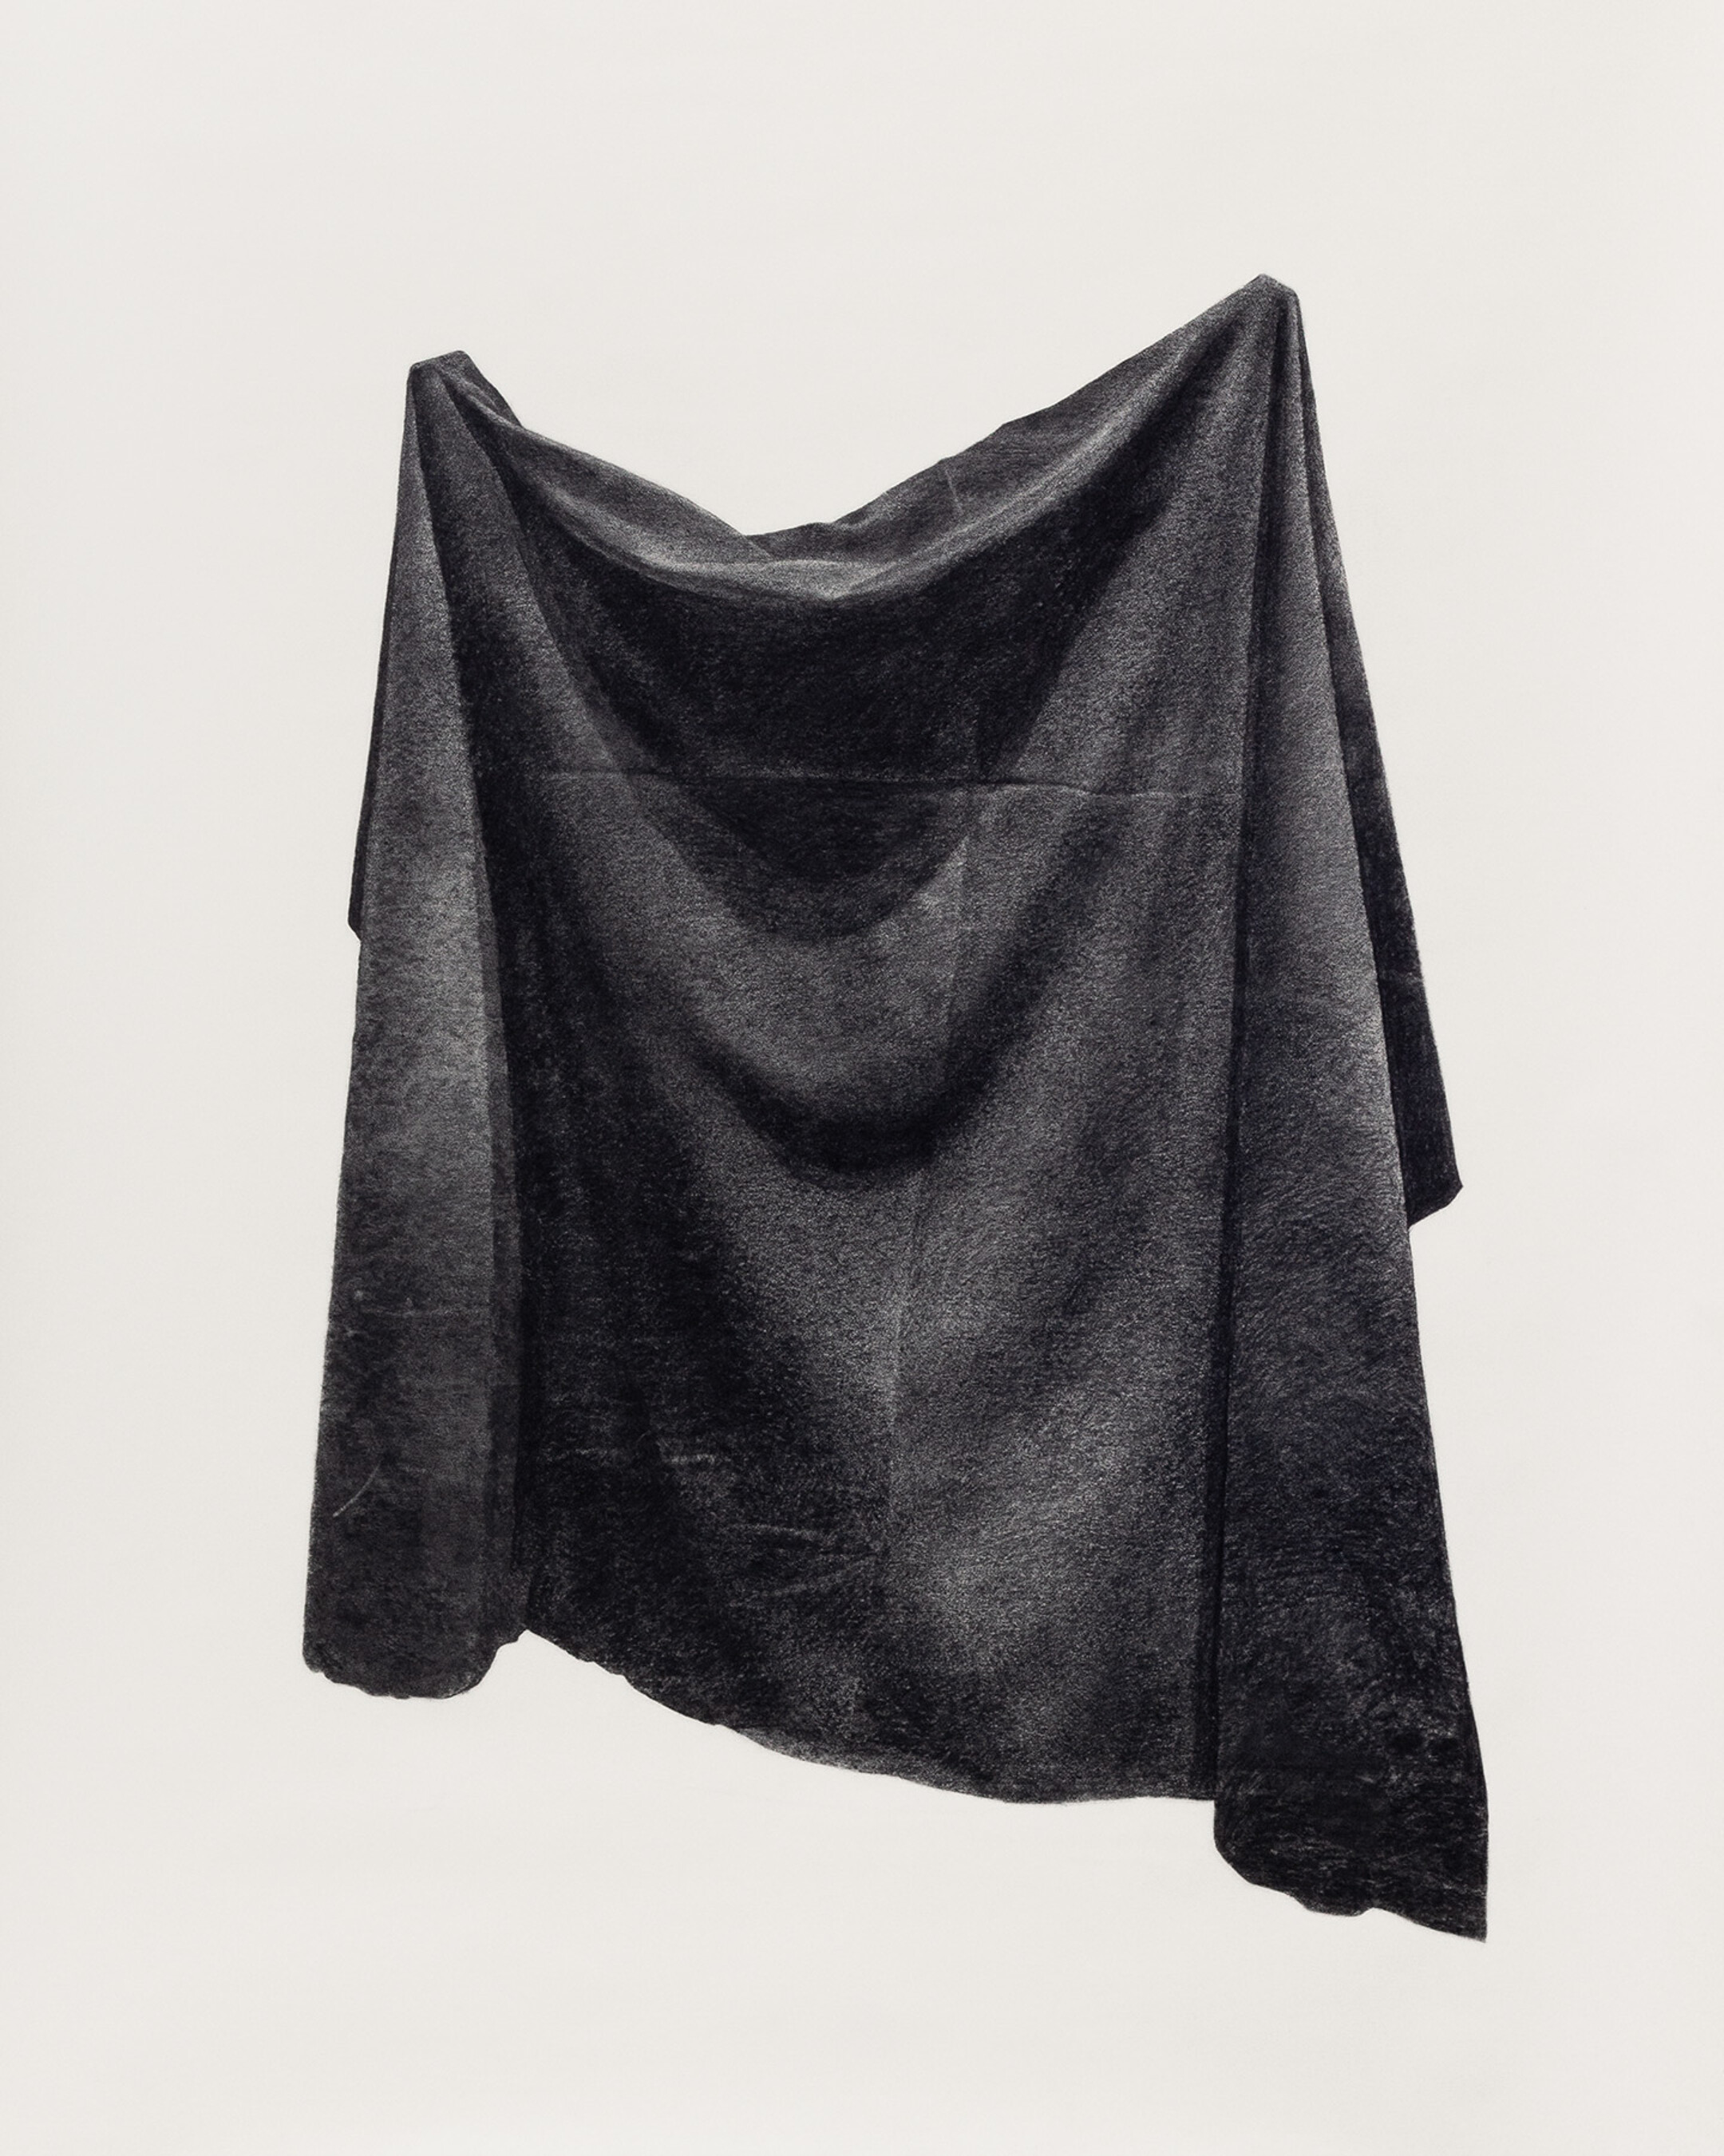 Drawing of draped fabric in charcoal on paper